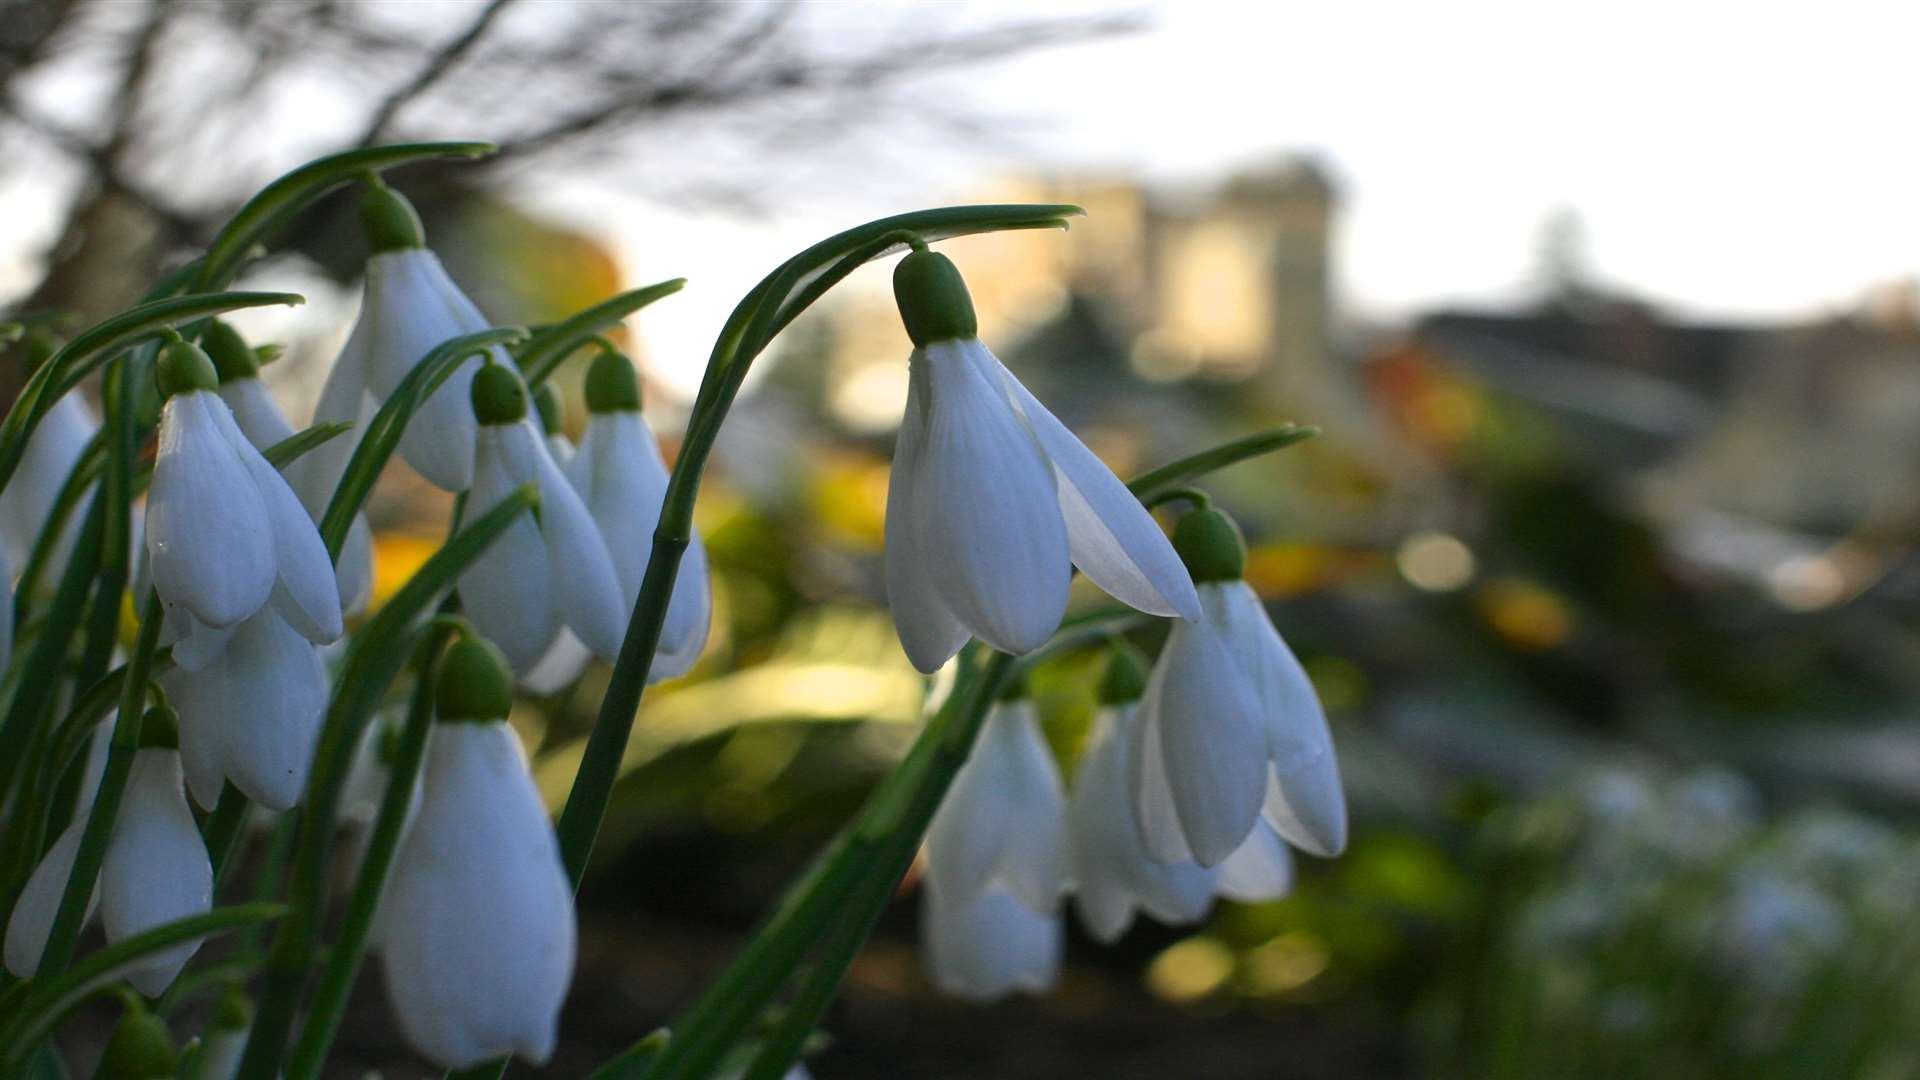 Hail the snowdrop, the pint-sized dazzler of late winter